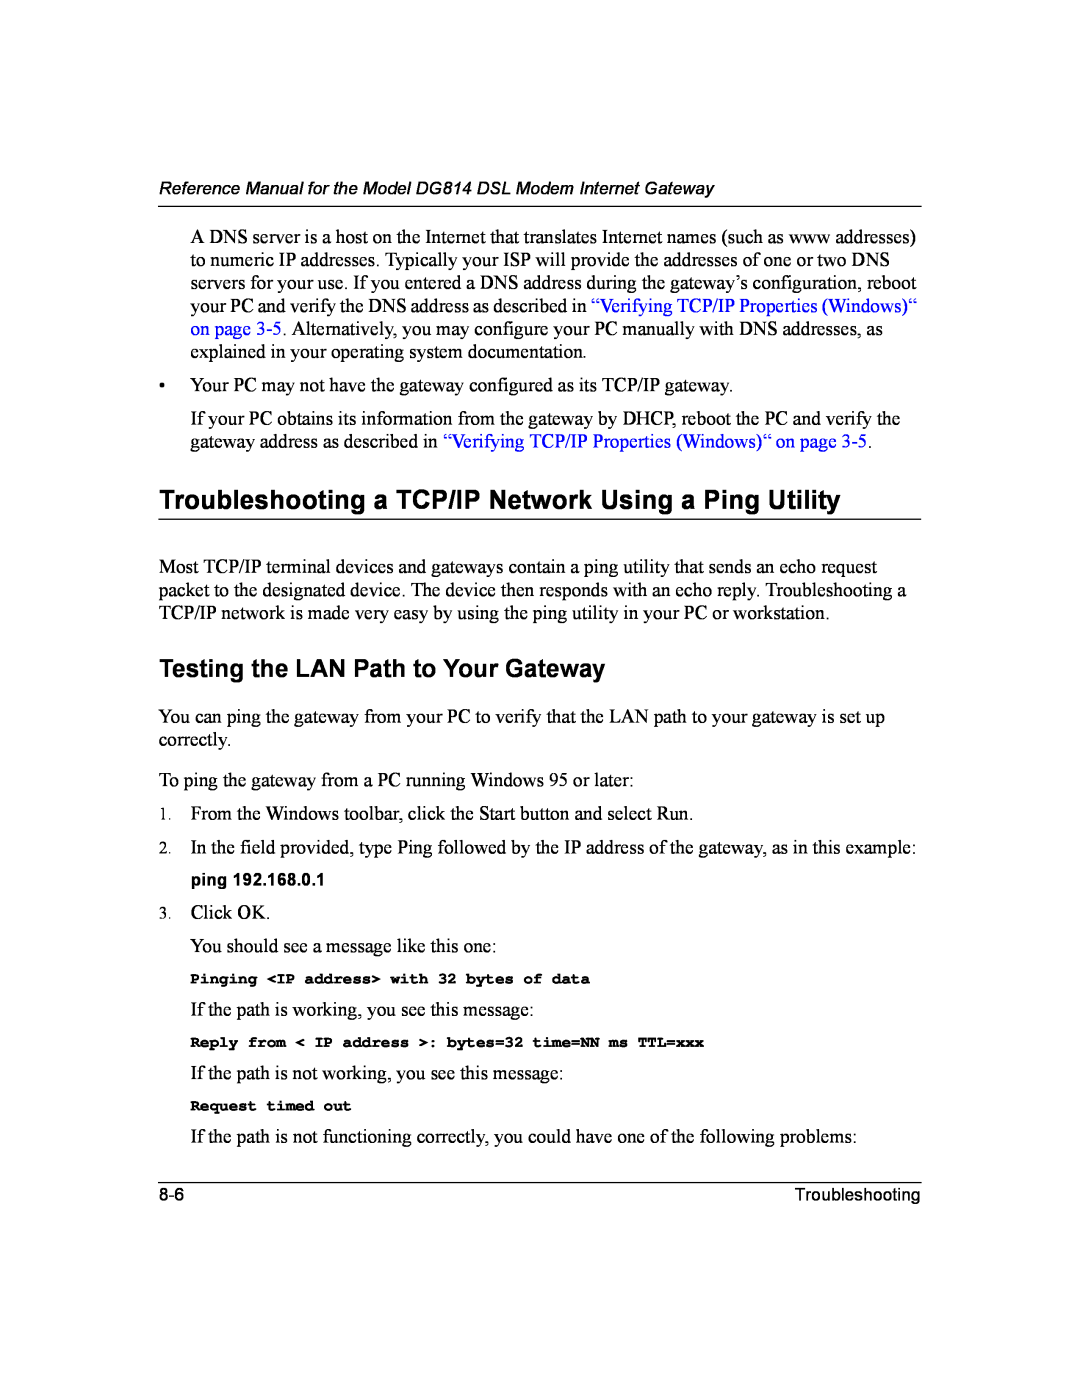 NETGEAR DG814 DSL manual Troubleshooting a TCP/IP Network Using a Ping Utility, Testing the LAN Path to Your Gateway 